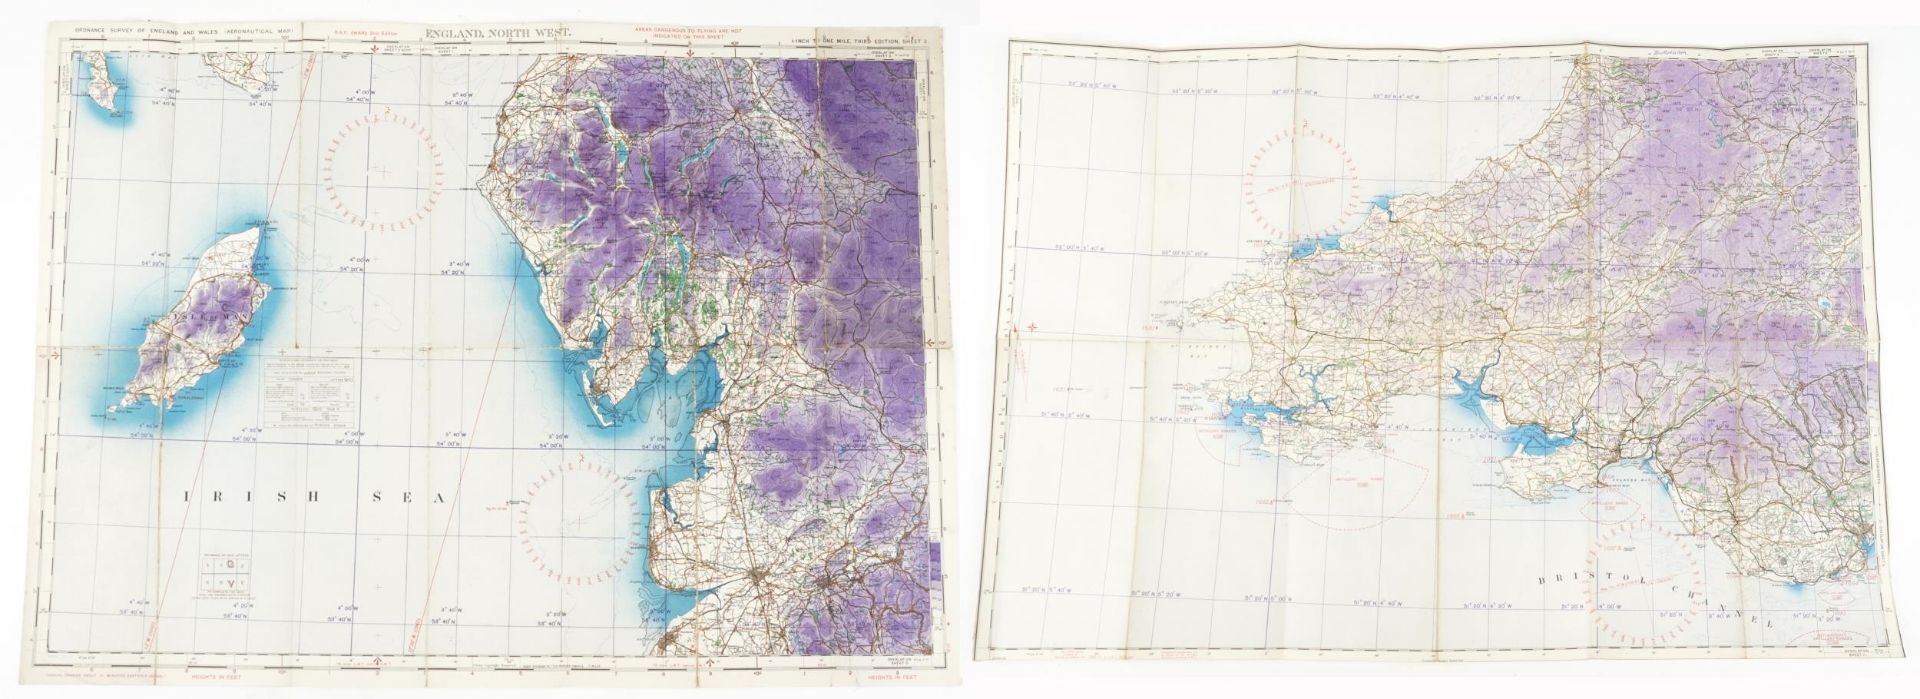 Two military interest RAF Ordnance Survey aeronautical maps of England and Wales including